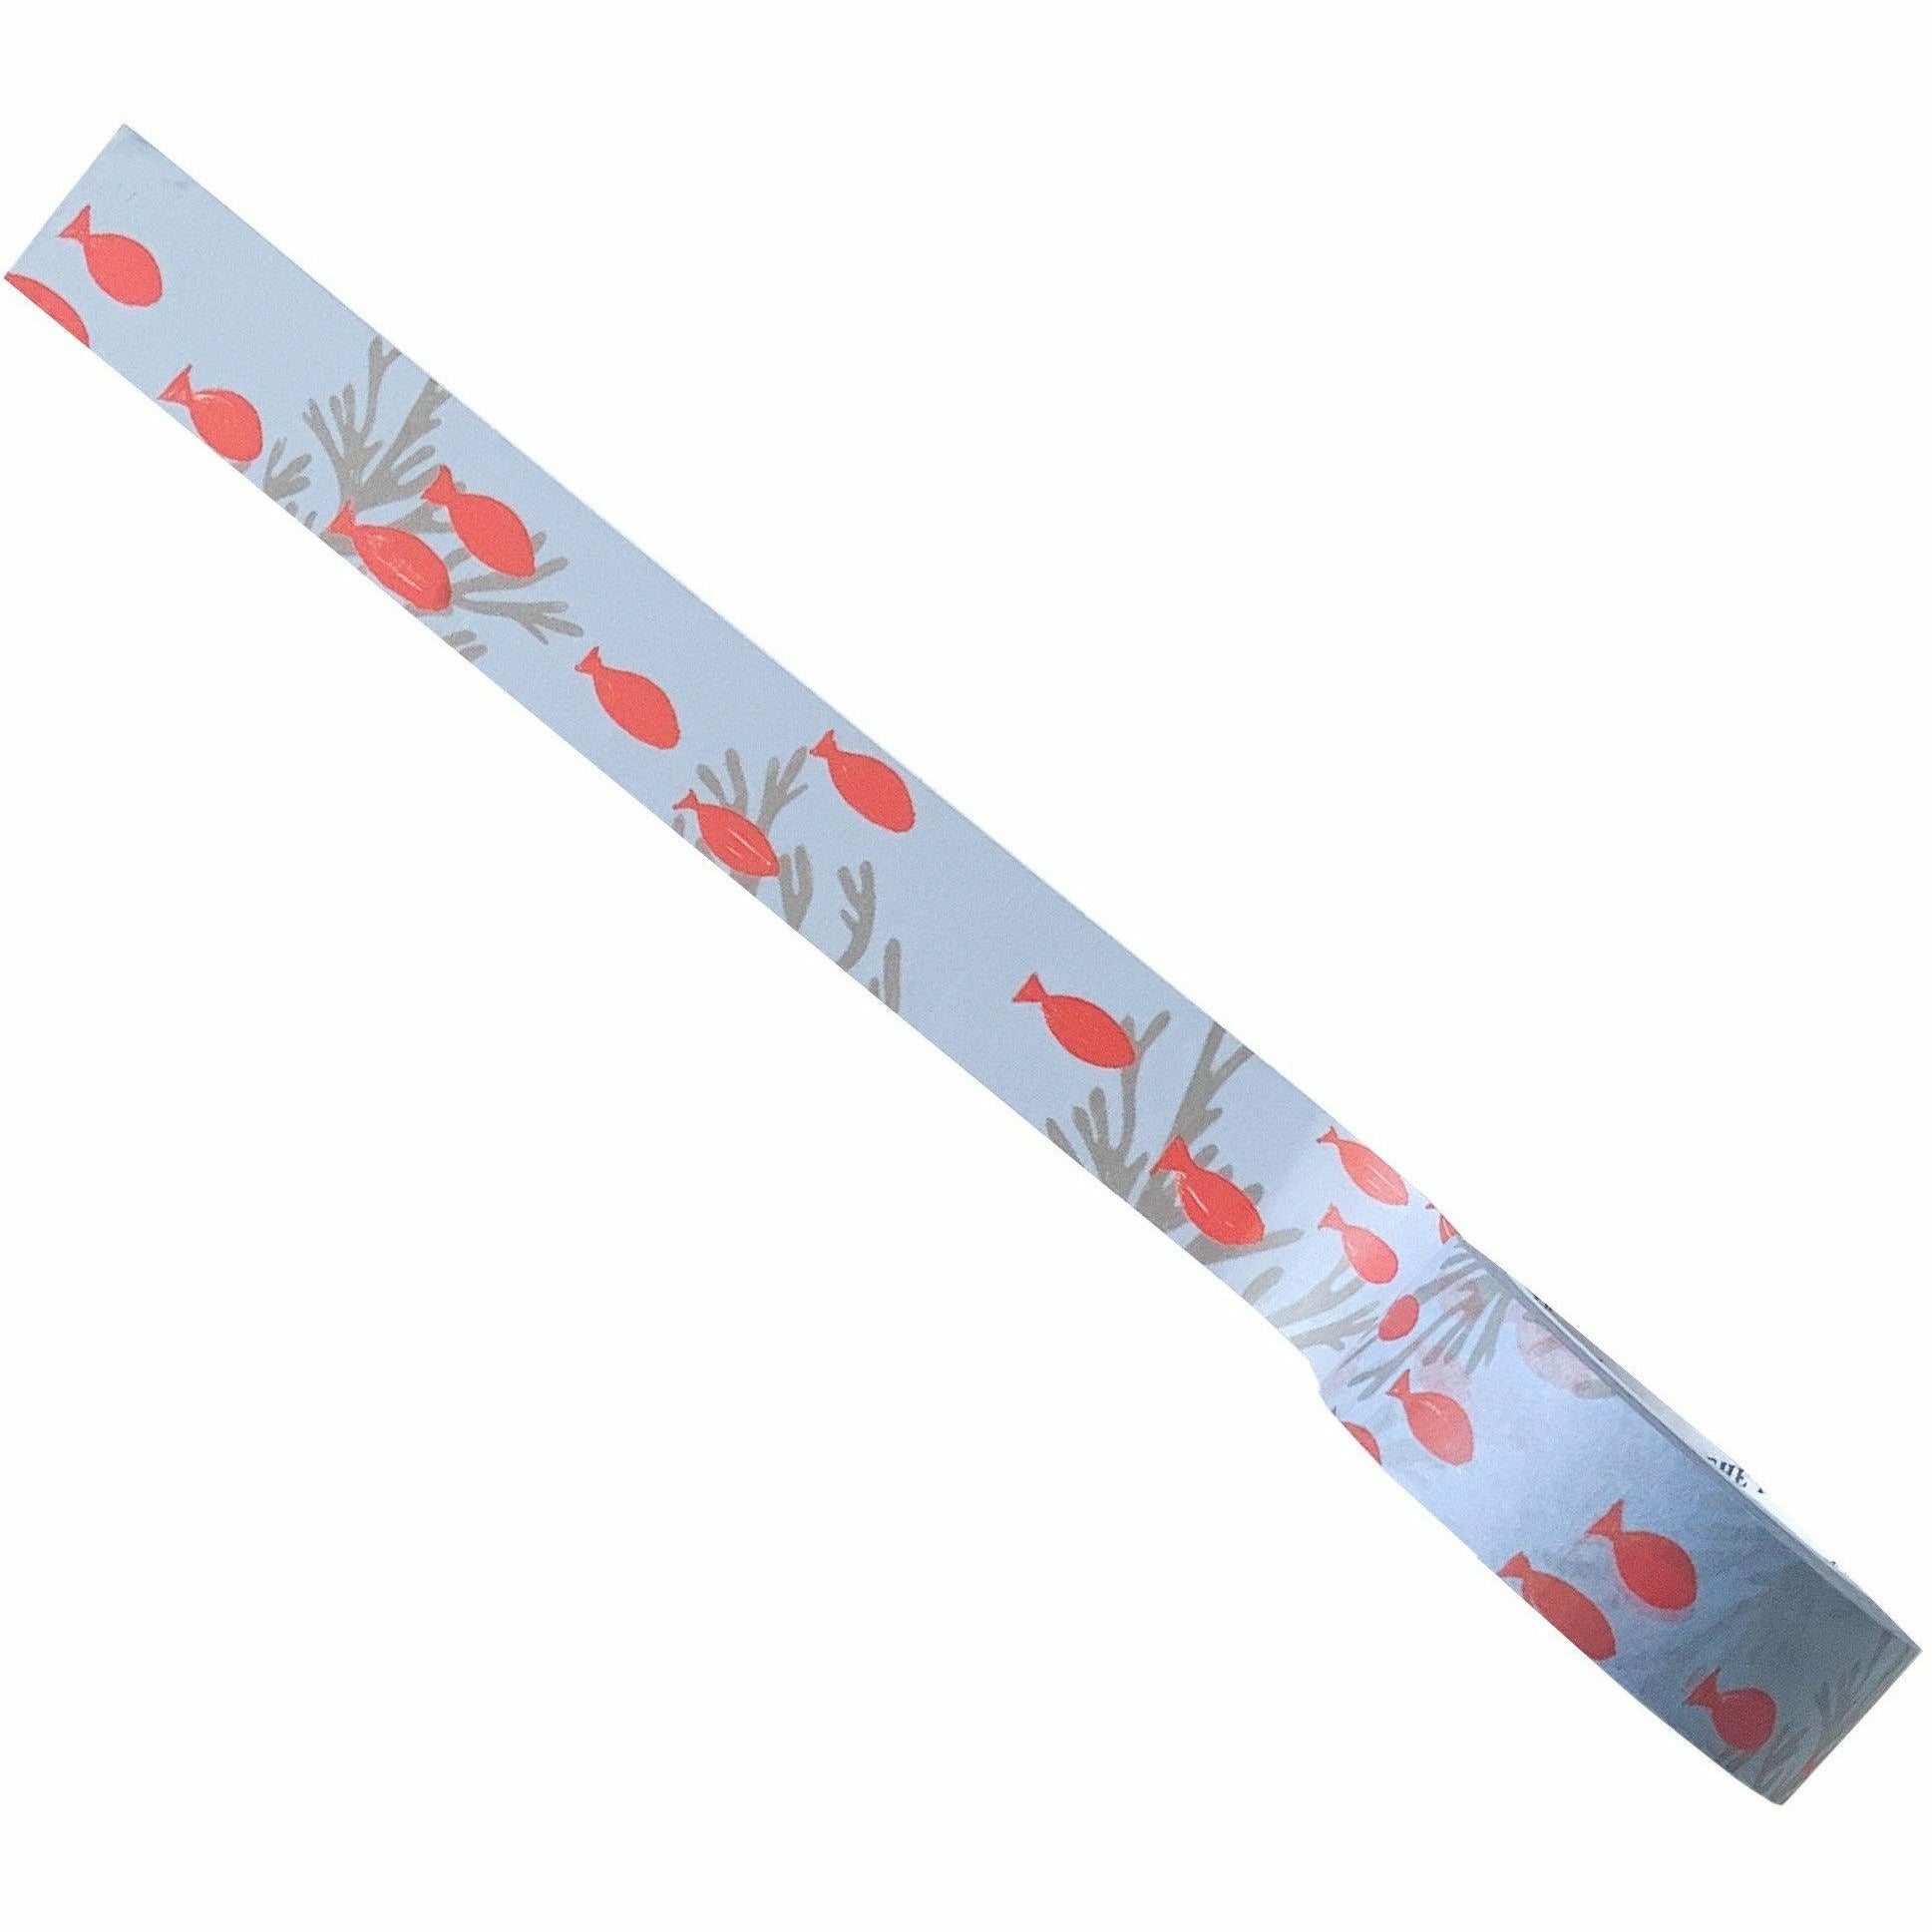 Red Fish Fun and Whimsical Washi Tape for Packing and Decorating - The First Snow